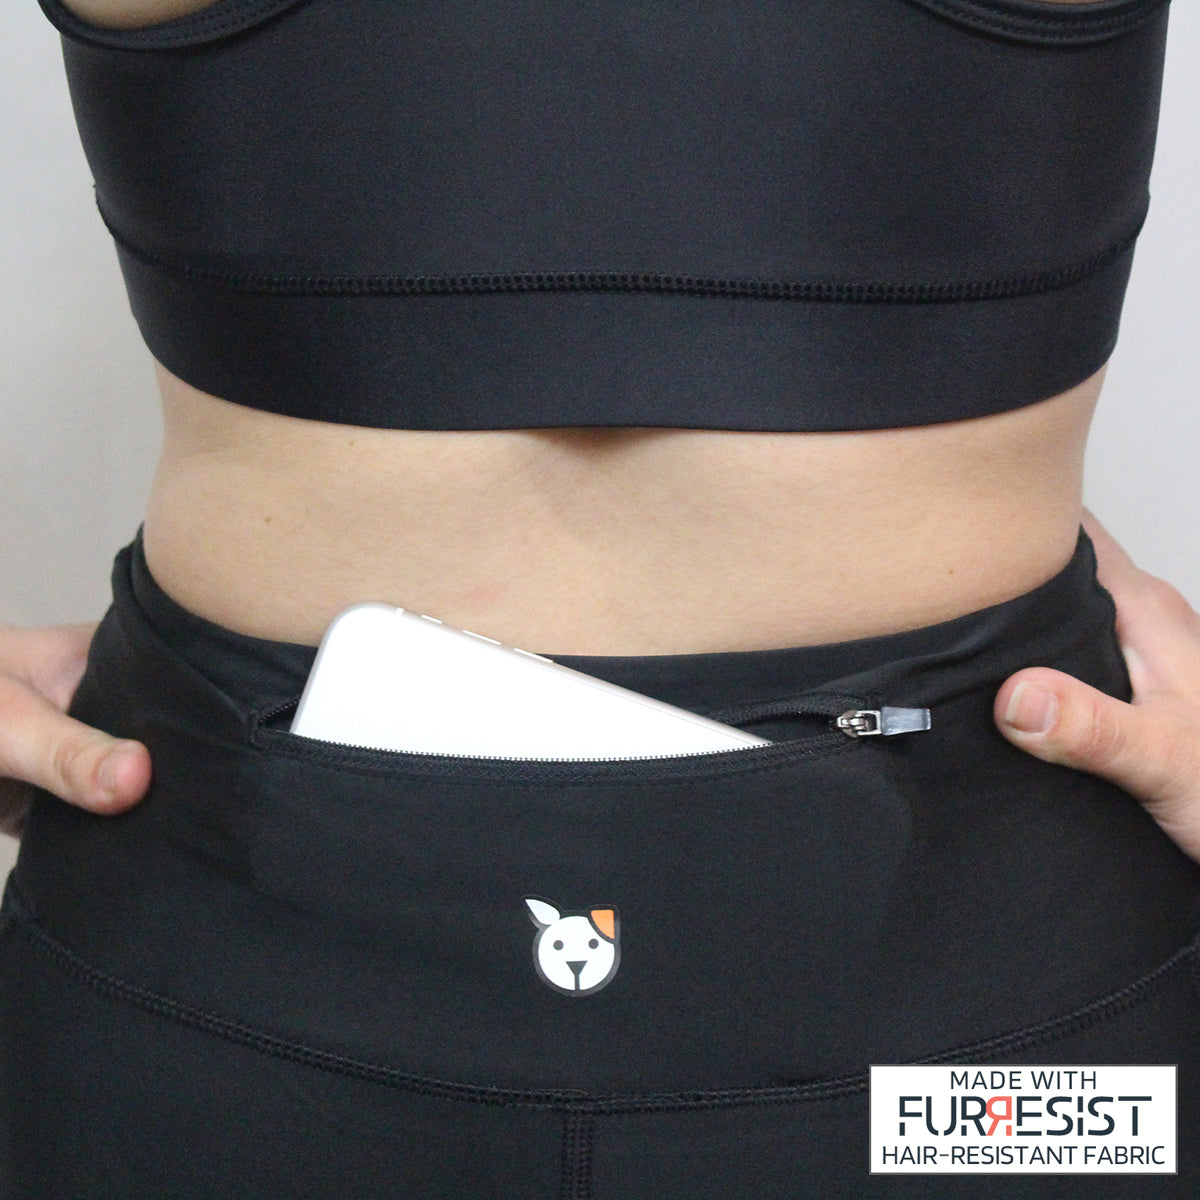 Loyalty Pet Products “Honor” Special Edition Compression Shorts with FuRResist